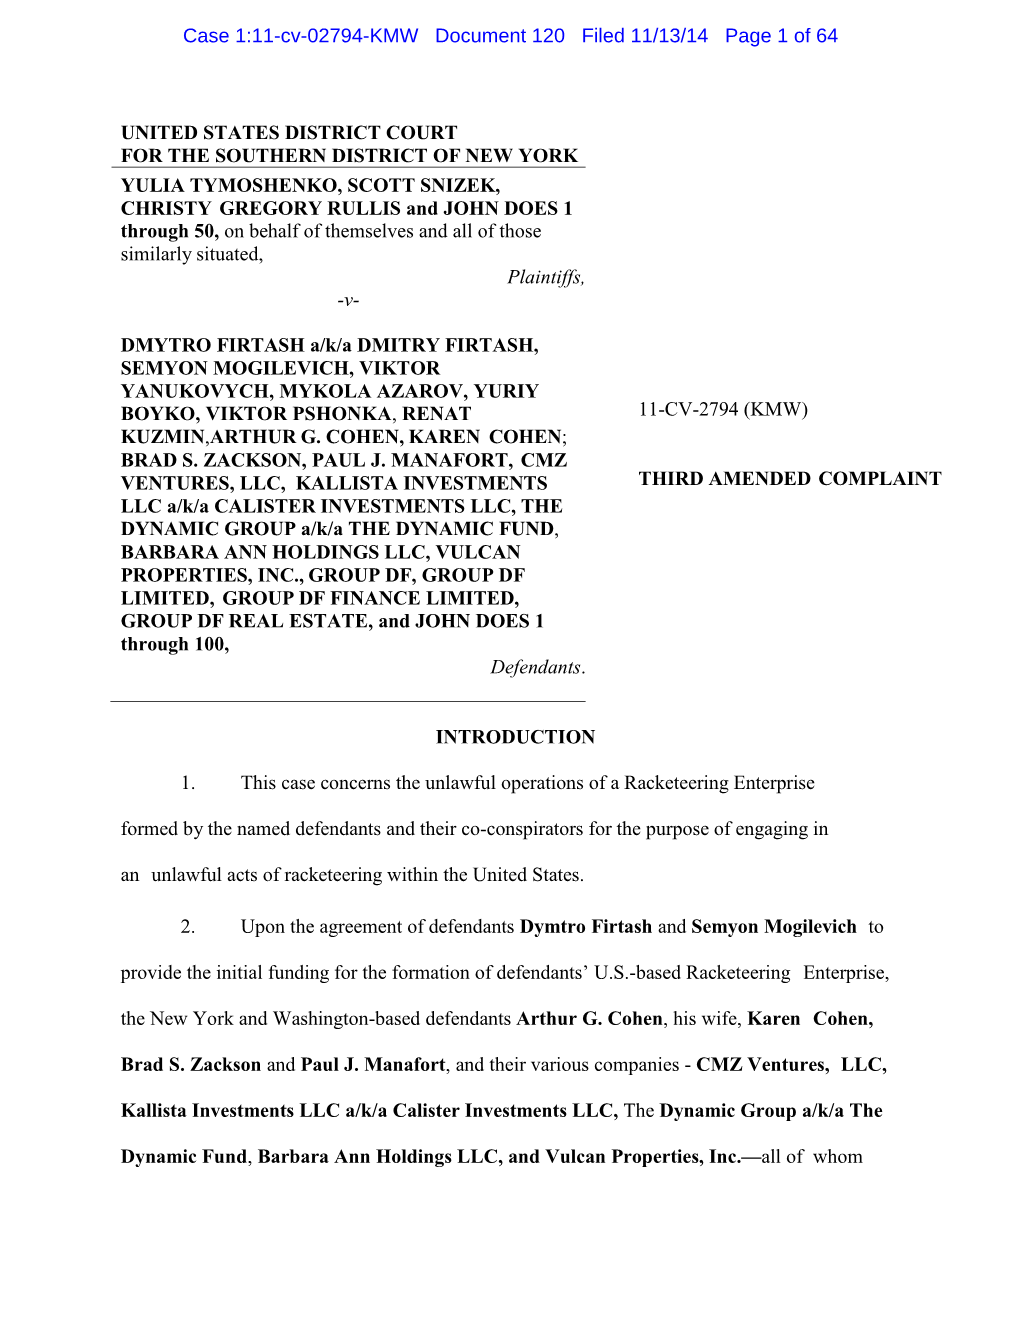 UNITED STATES DISTRICT COURT for the SOUTHERN DISTRICT of NEW YORK YULIA TYMOSHENKO, SCOTT SNIZEK, CHRISTY GREGORY RULLIS and JO